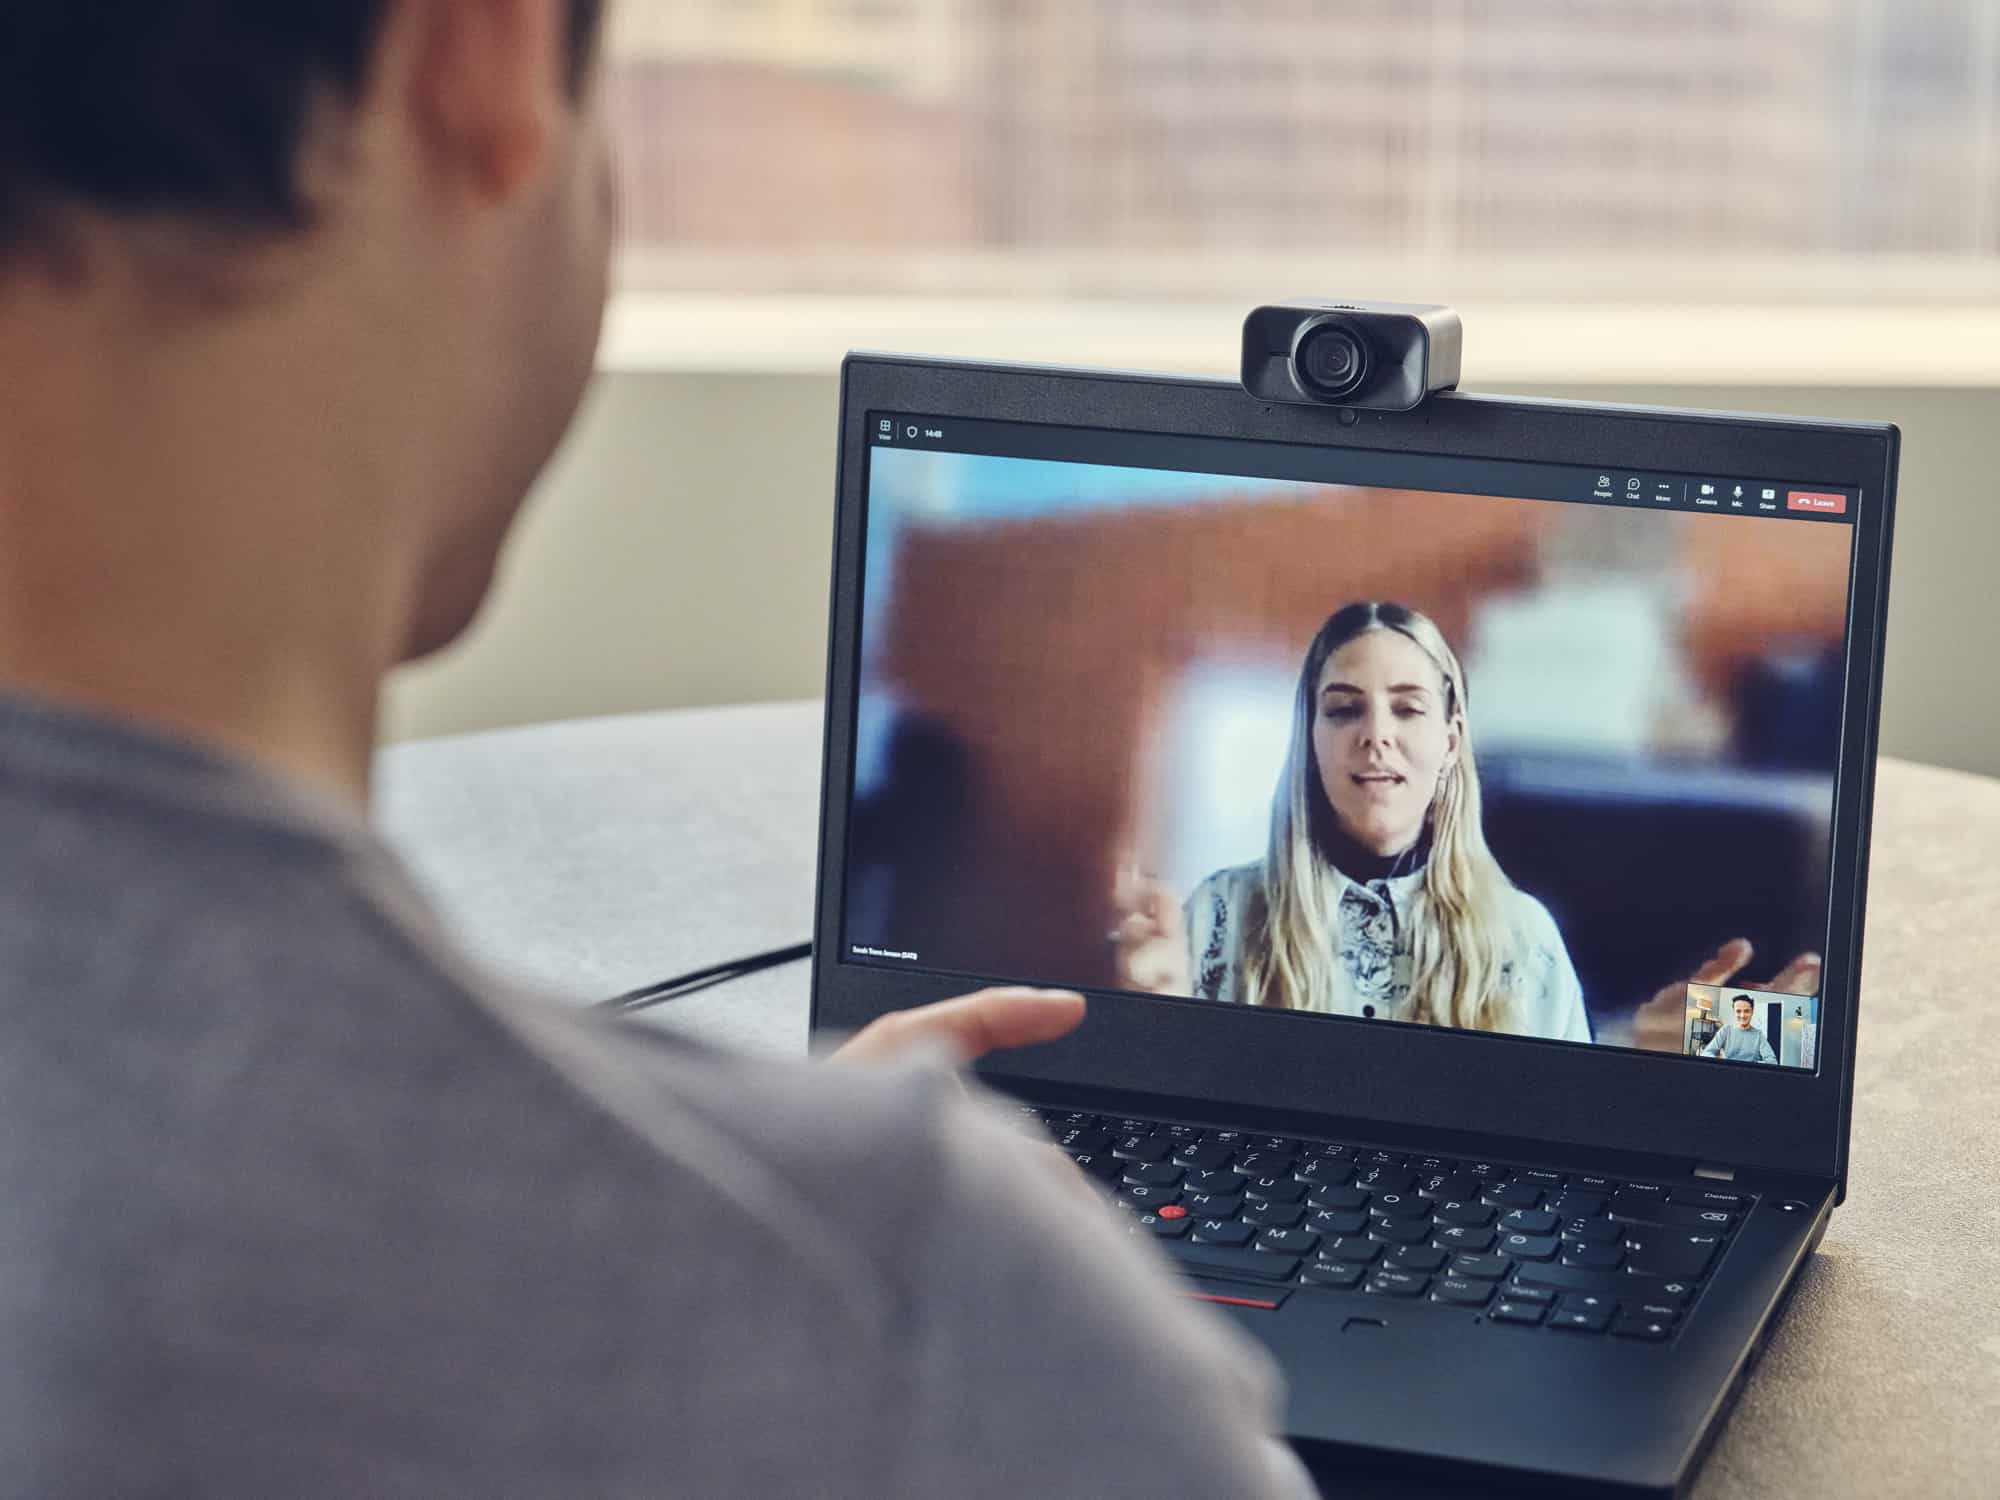 EPOS is launching their first personal webcam